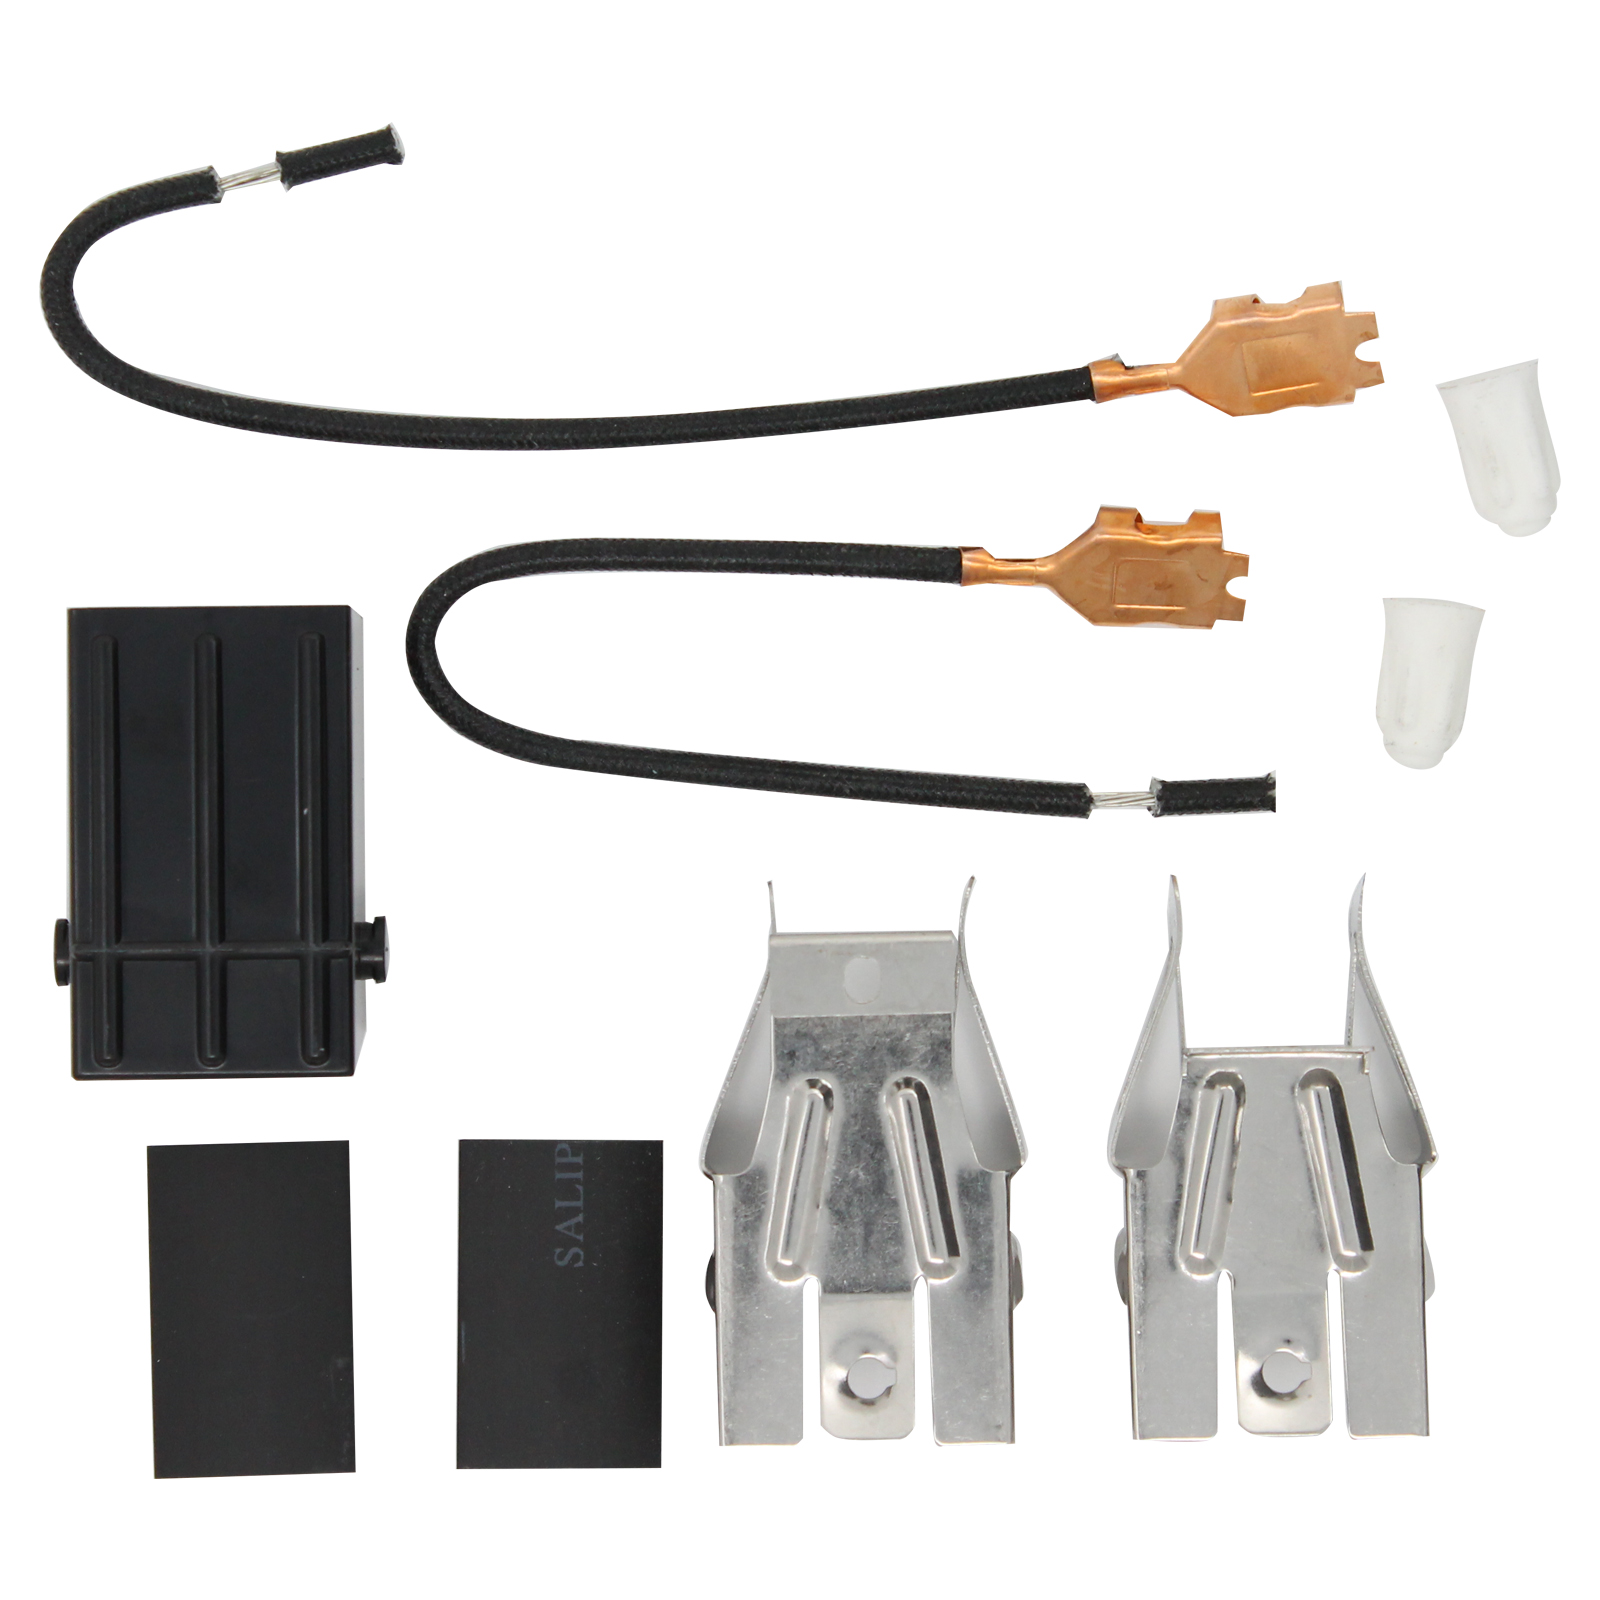 330031 Top Burner Receptacle Kit Replacement for Amana SBE26DC Range/Cooktop/Oven - Compatible with 330031 Range Burner Receptacle Kit - UpStart Components Brand - image 2 of 4